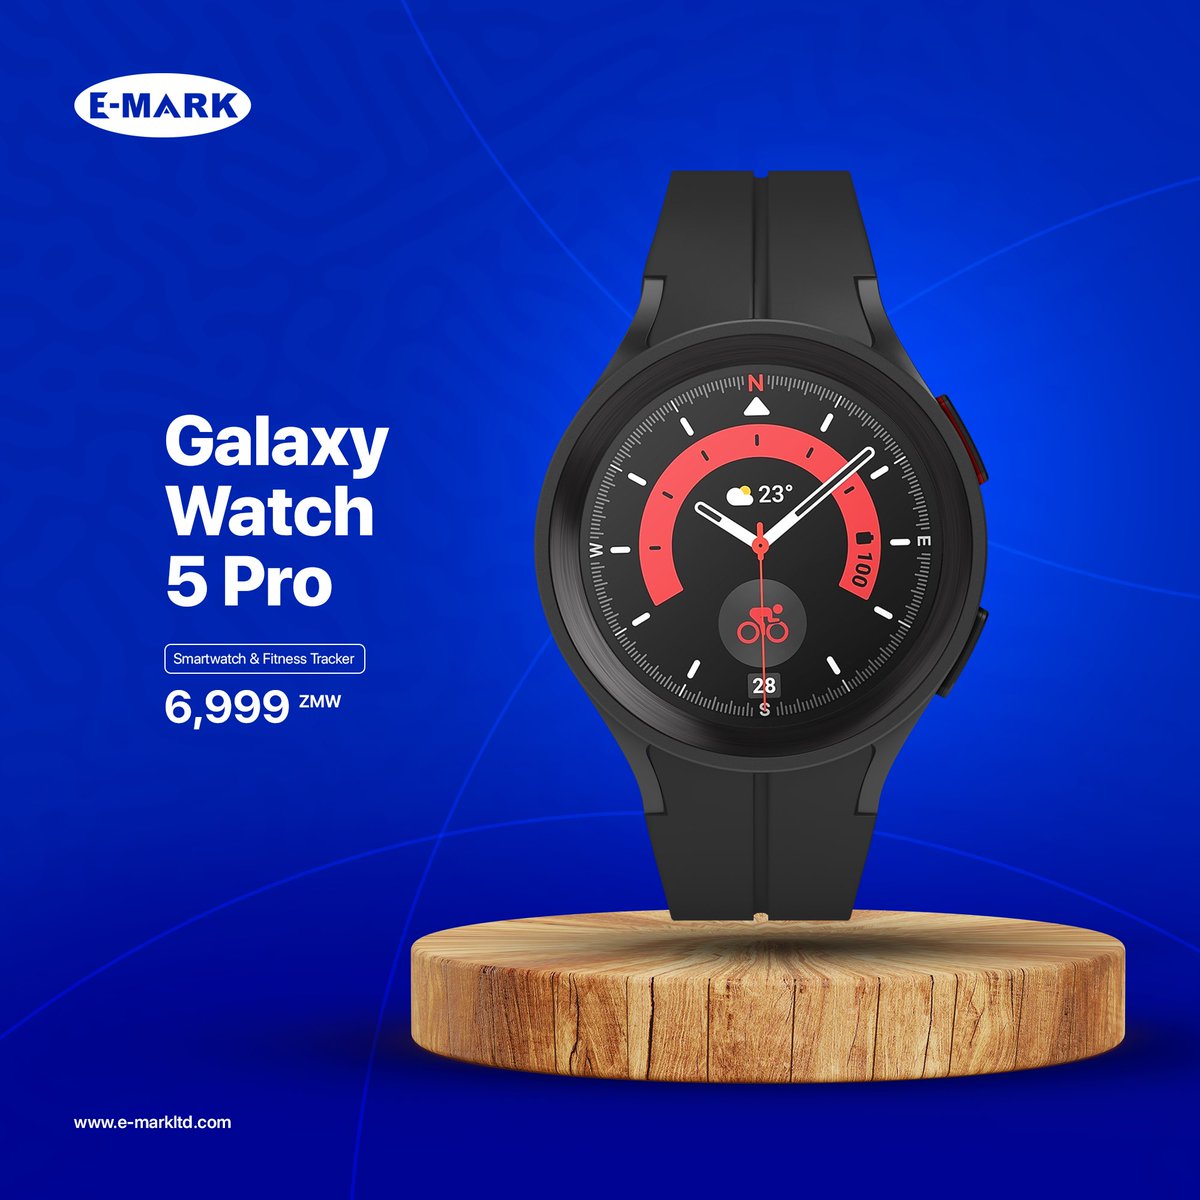 When it comes to battery life, the watch 5 pro remains unbeatable, its features, a perfect fit for outdoor adventure, the lightweight titanium casing and a sapphire glass AMOLED display an array class. #GalaxyWatch #5pro #ConnectingPeople.